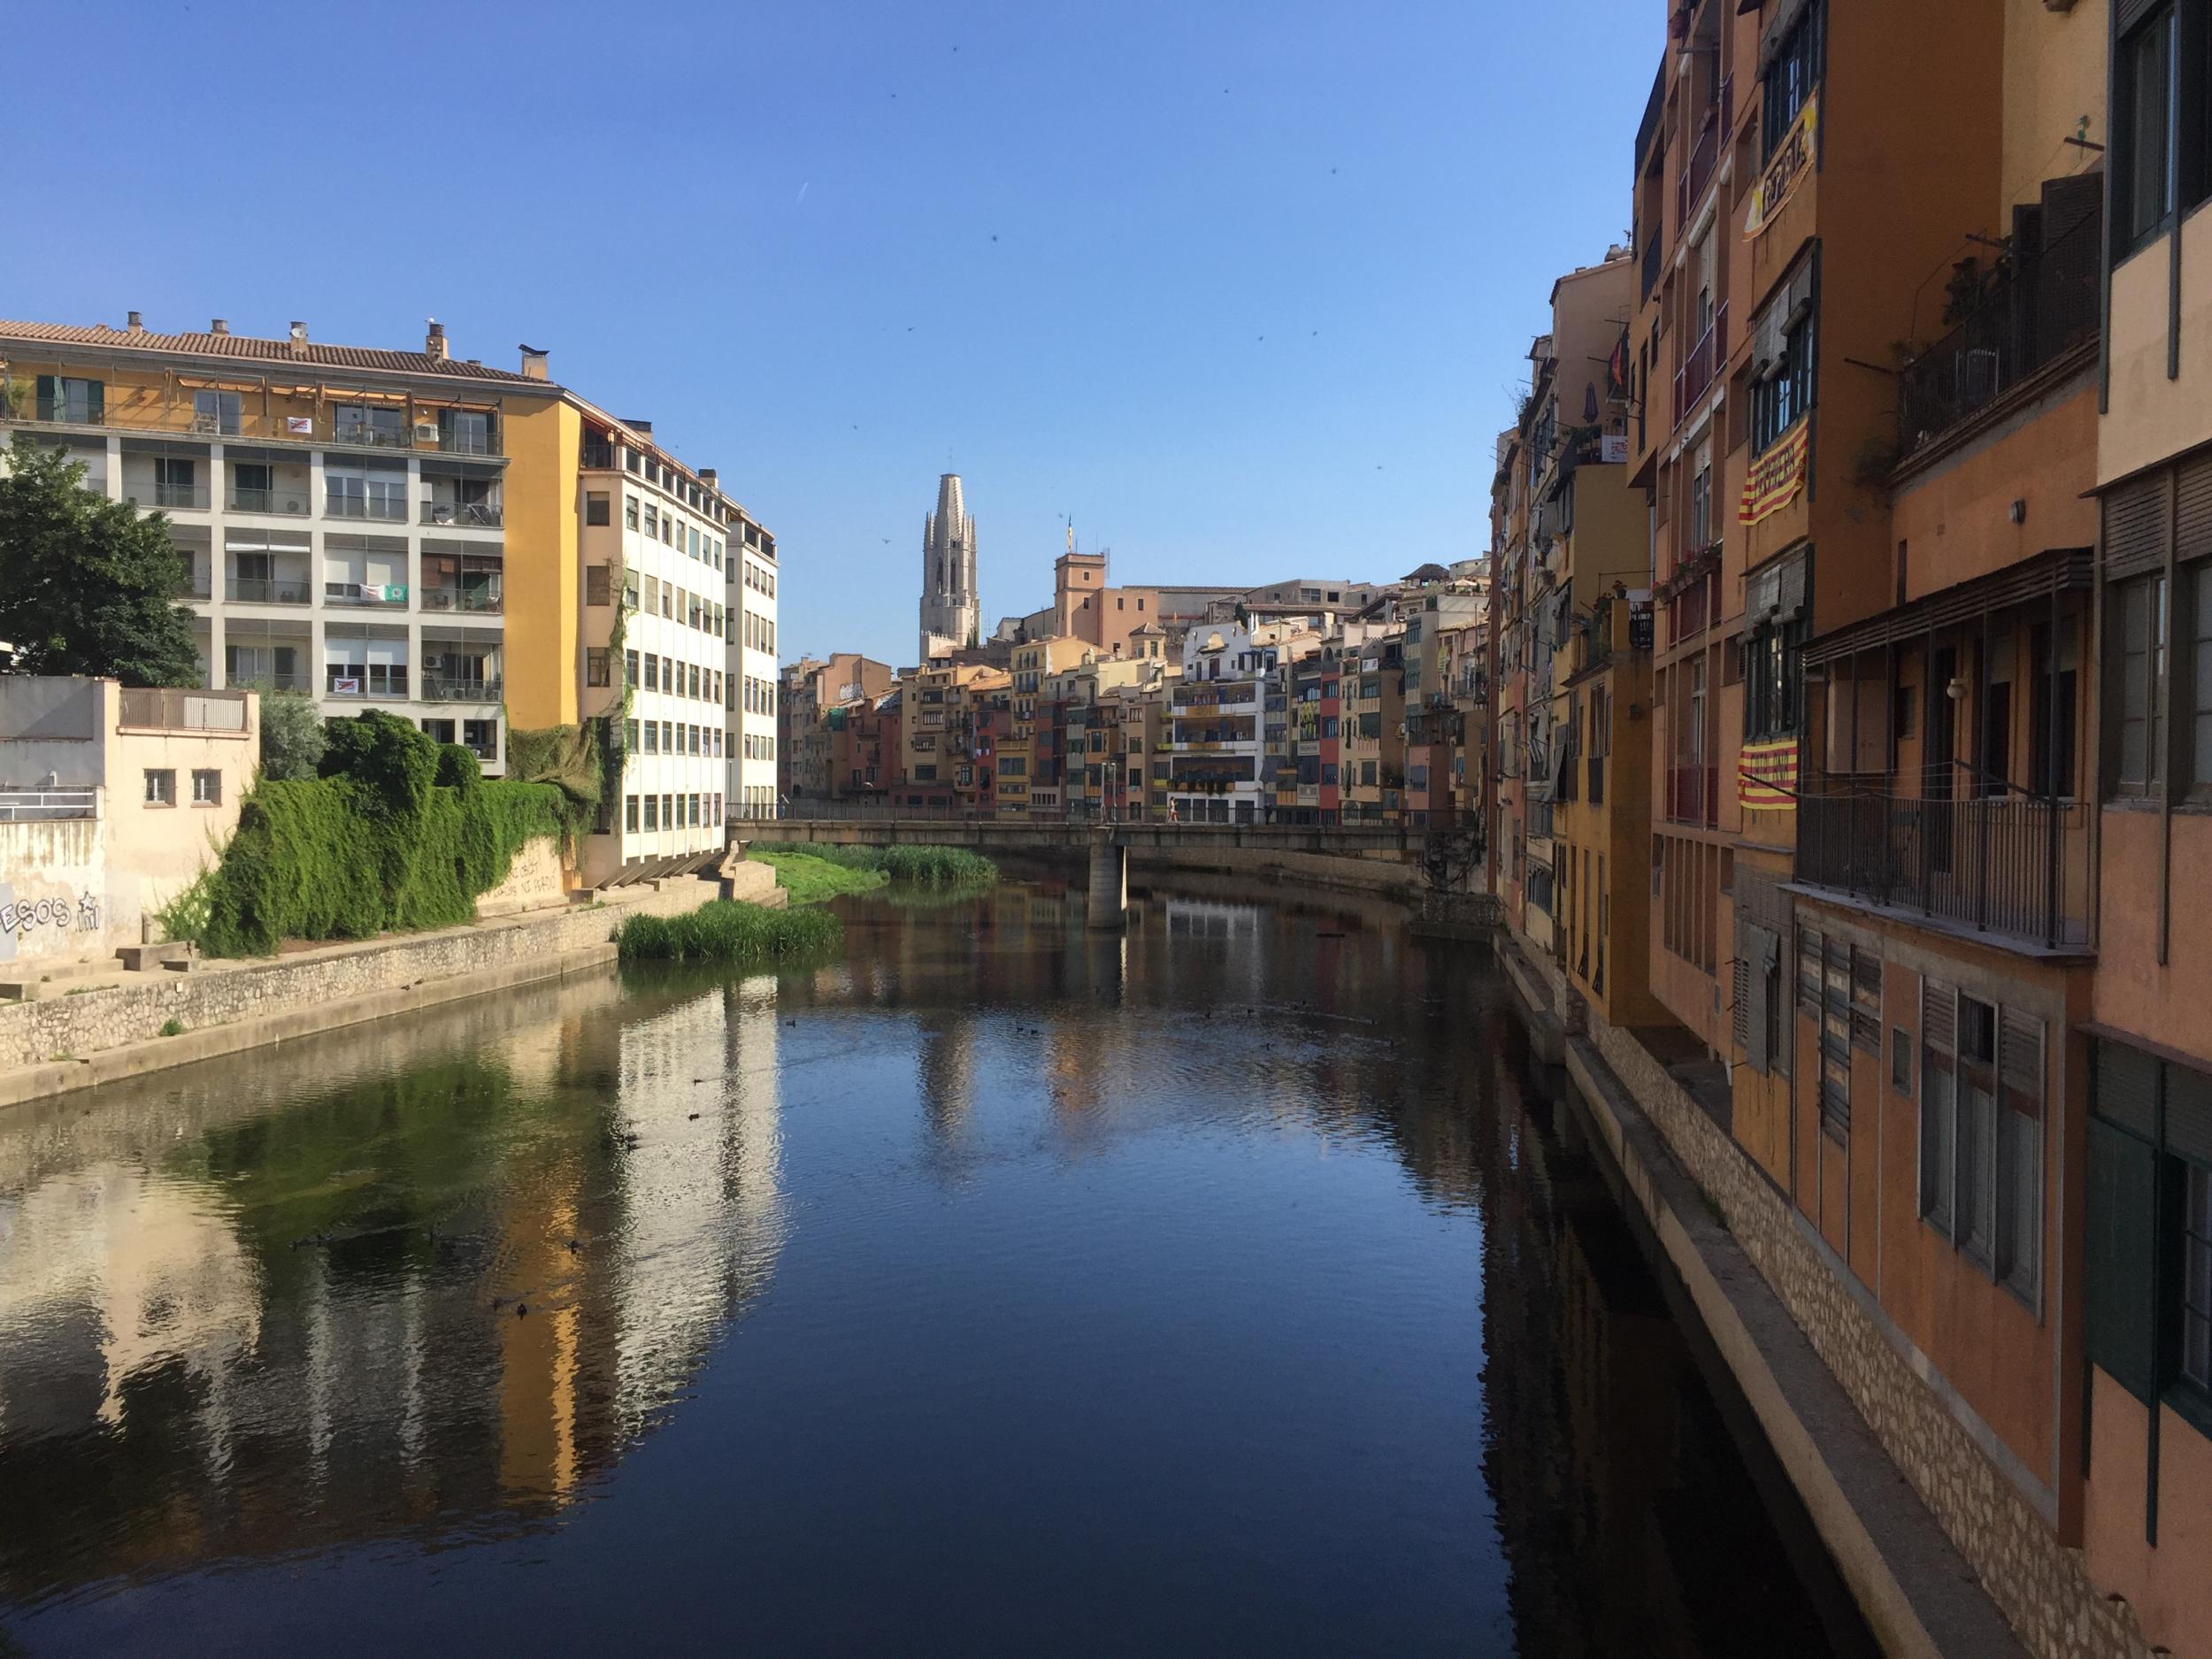 Girona is blissfully quiet compared to Barcelona